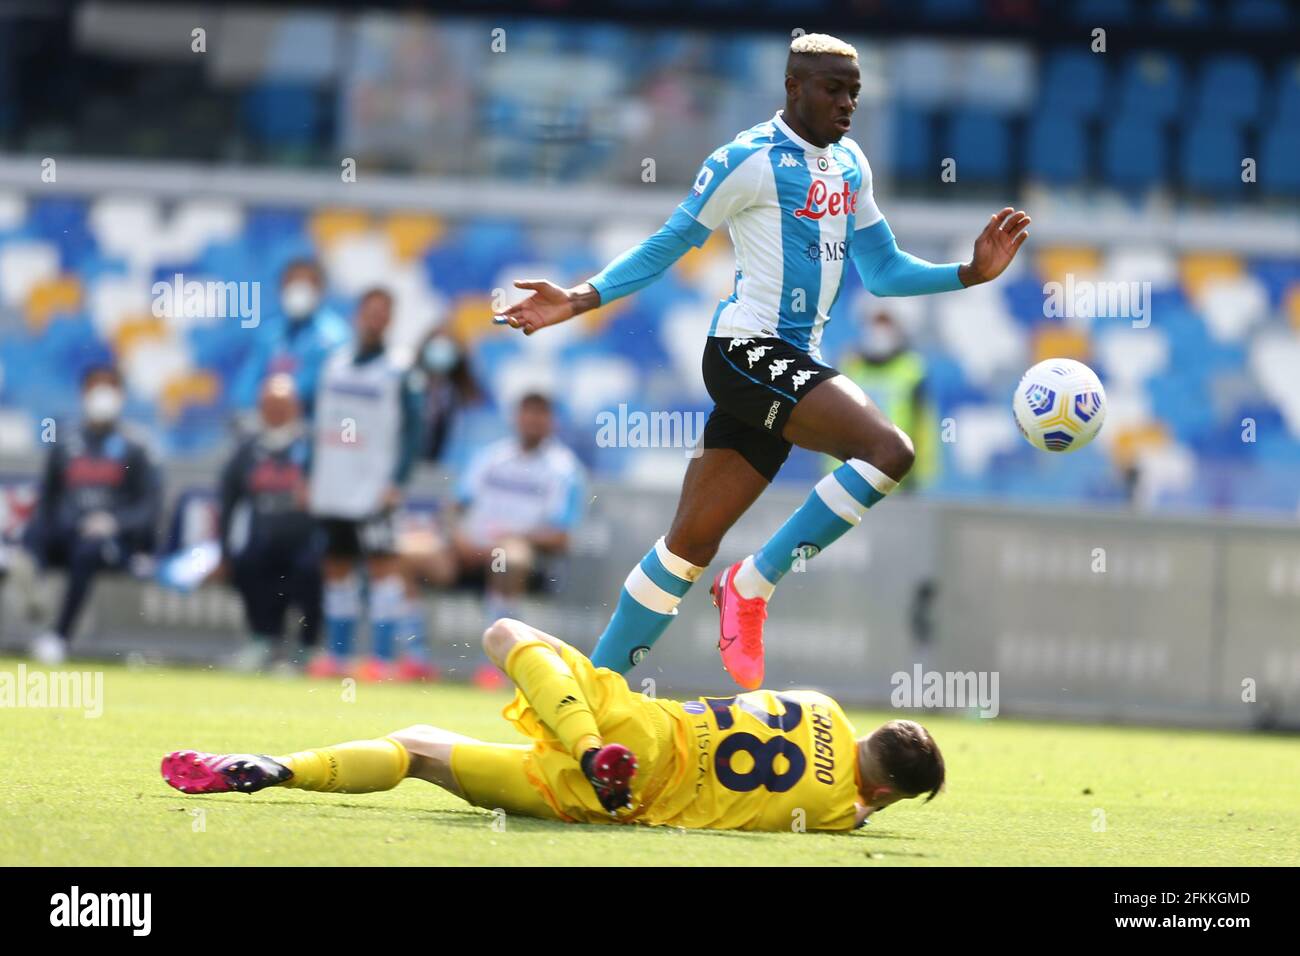 SSC Napoli's Nigerian striker Victor Osimhen challenges for the ball with Cagliari's Italian goalkeeper Alessio Cragno during the Serie A football match between SSC Napoli and Cagliari at the Diego Armando Maradona Stadium. Napoli Cagliari drawing 1-1. Stock Photo